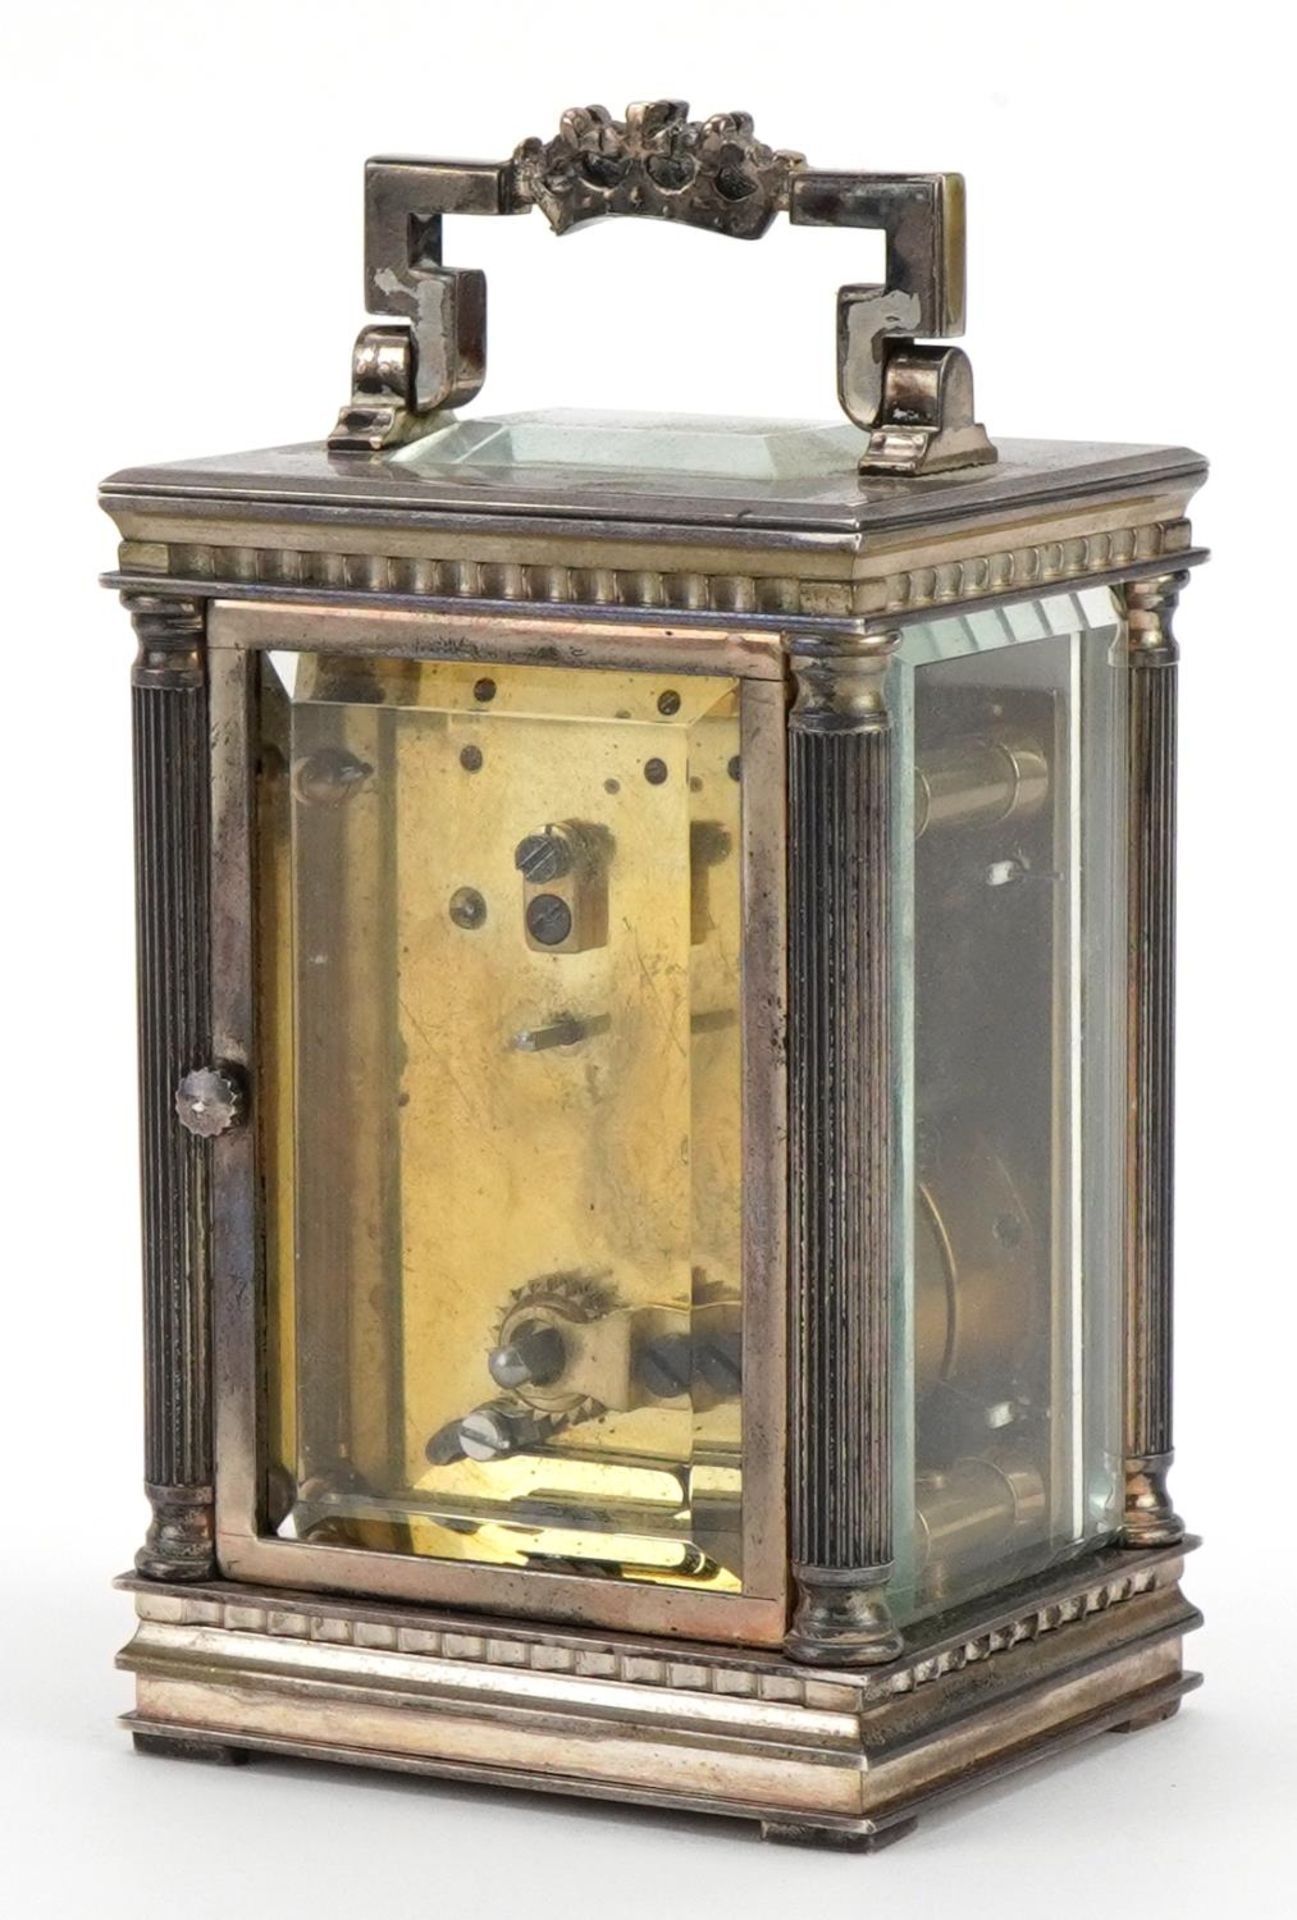 Charles Frodsham, miniature silver carriage clock with fleur de lis and circular dial inscribed - Image 2 of 5